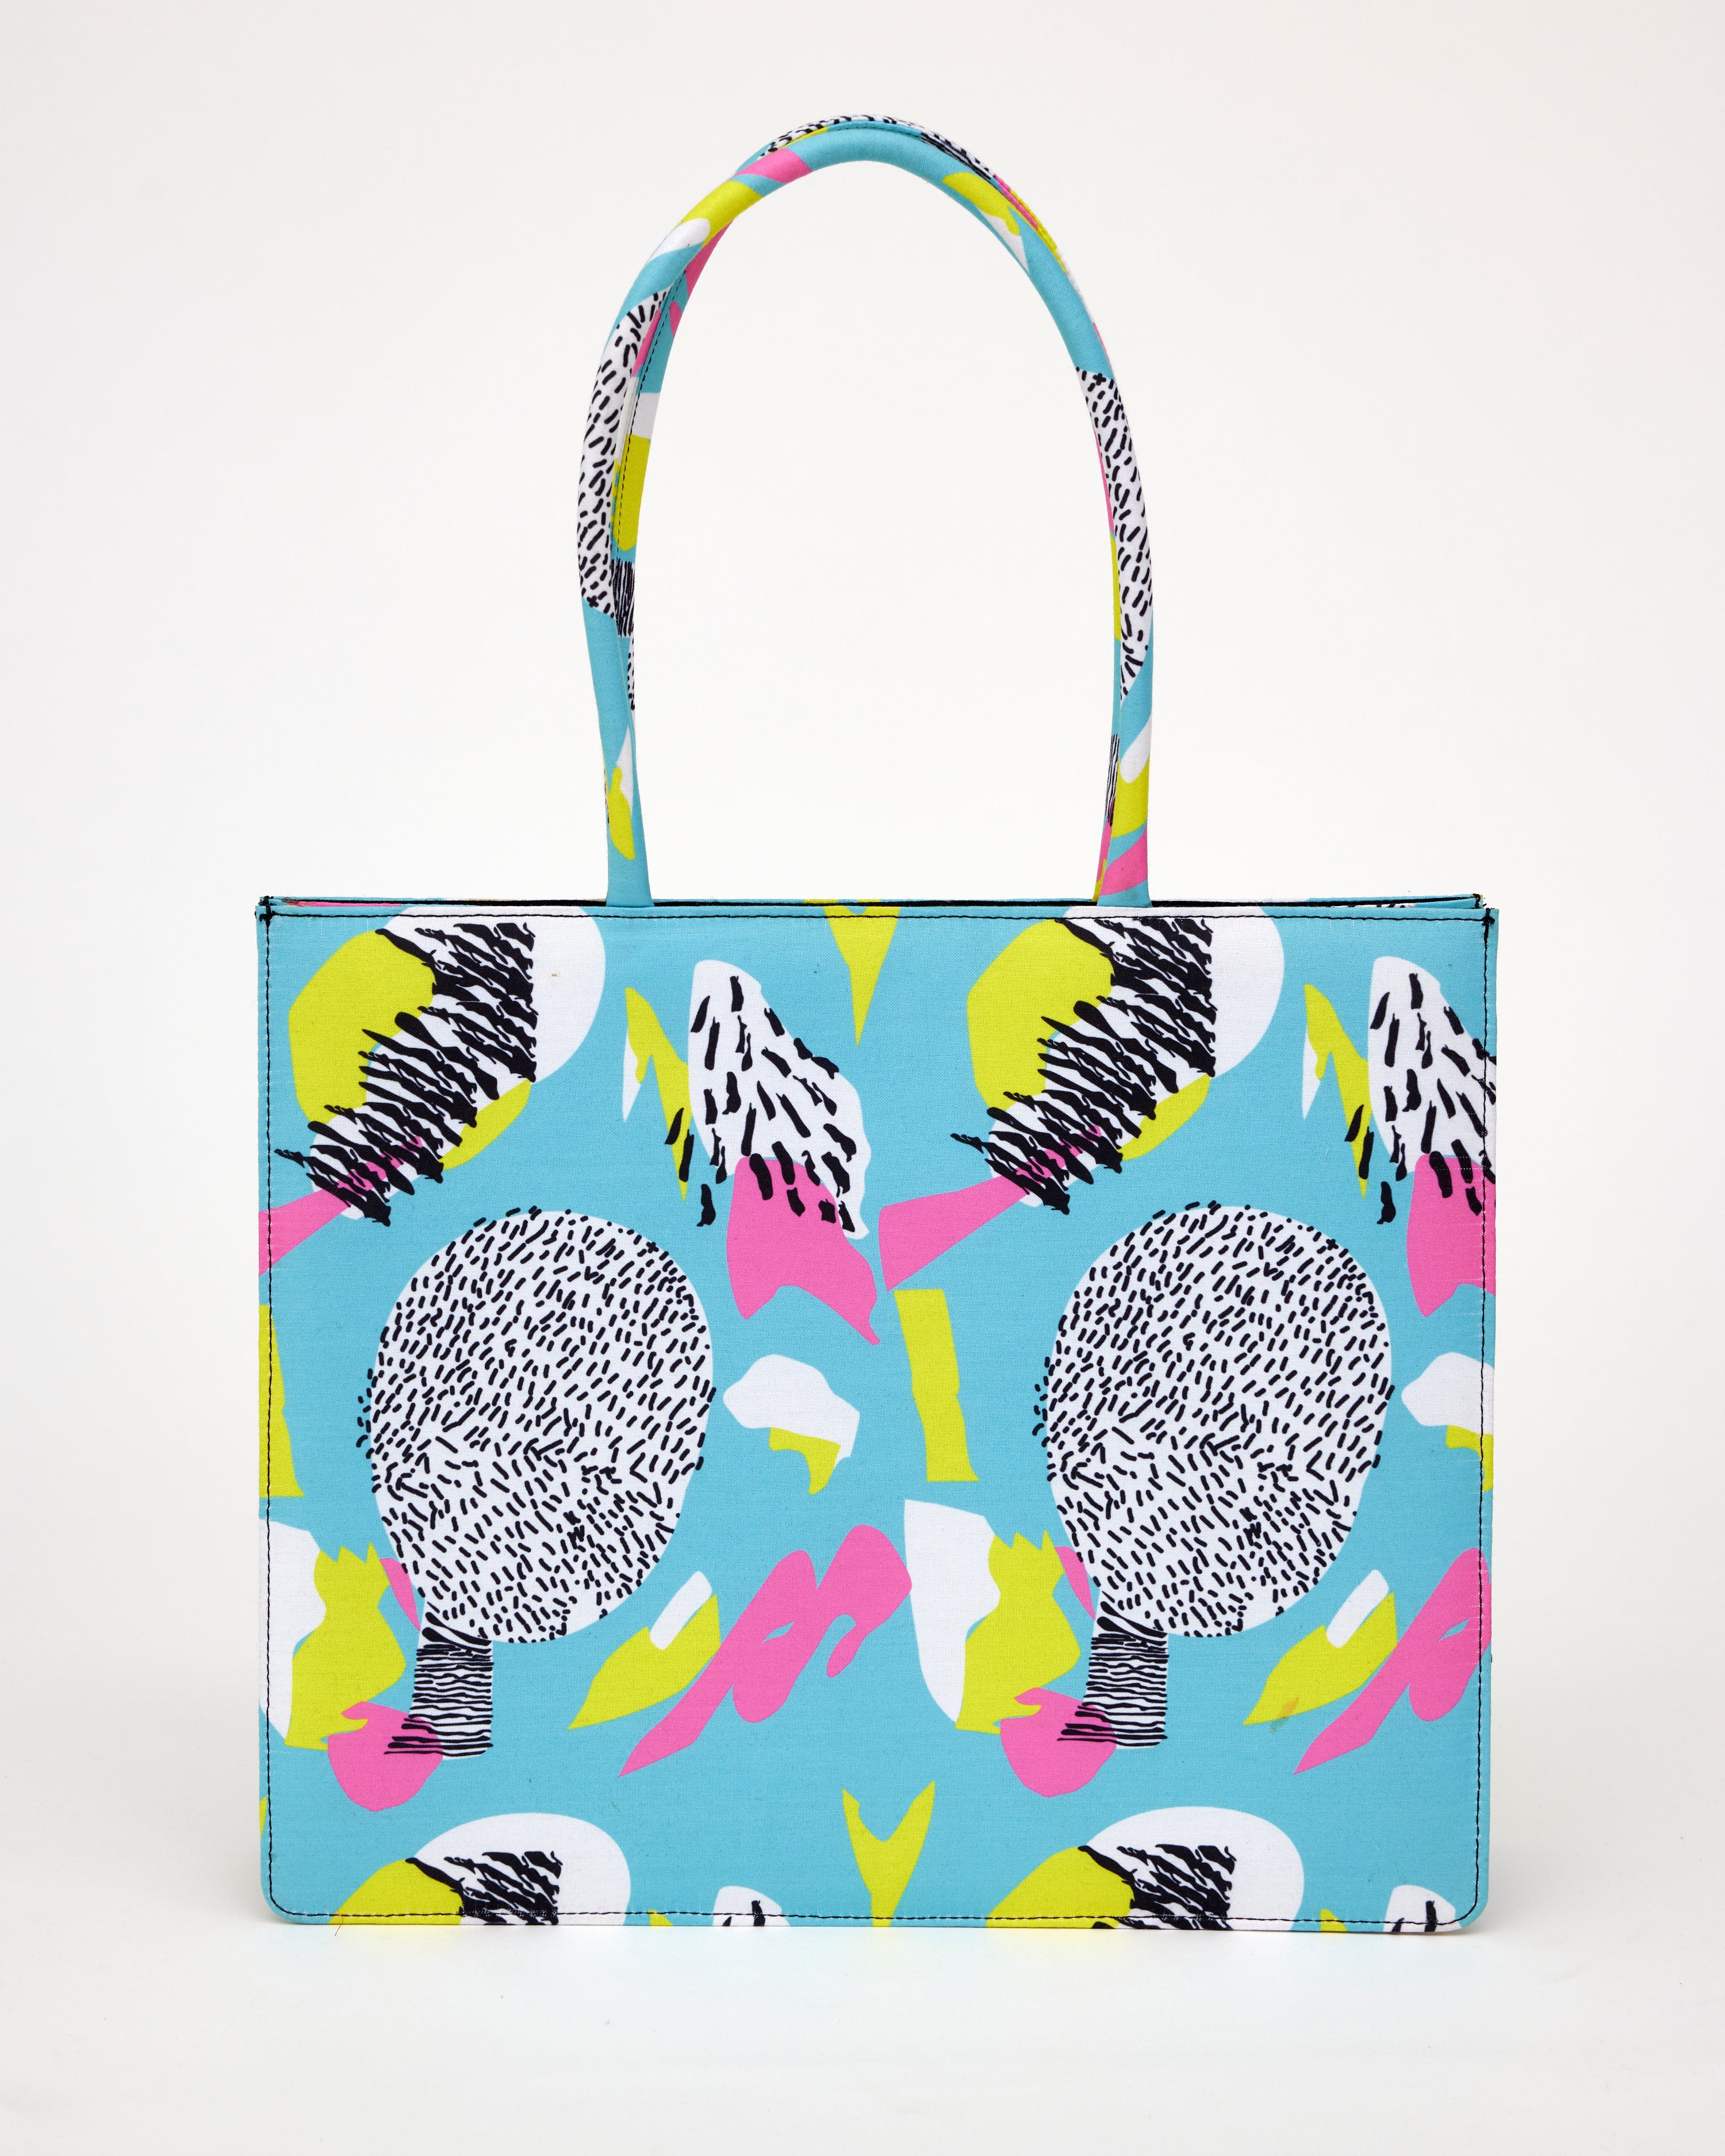 Wanderlust Tote Bag - Qurcha | Handmade Quirky Accessories